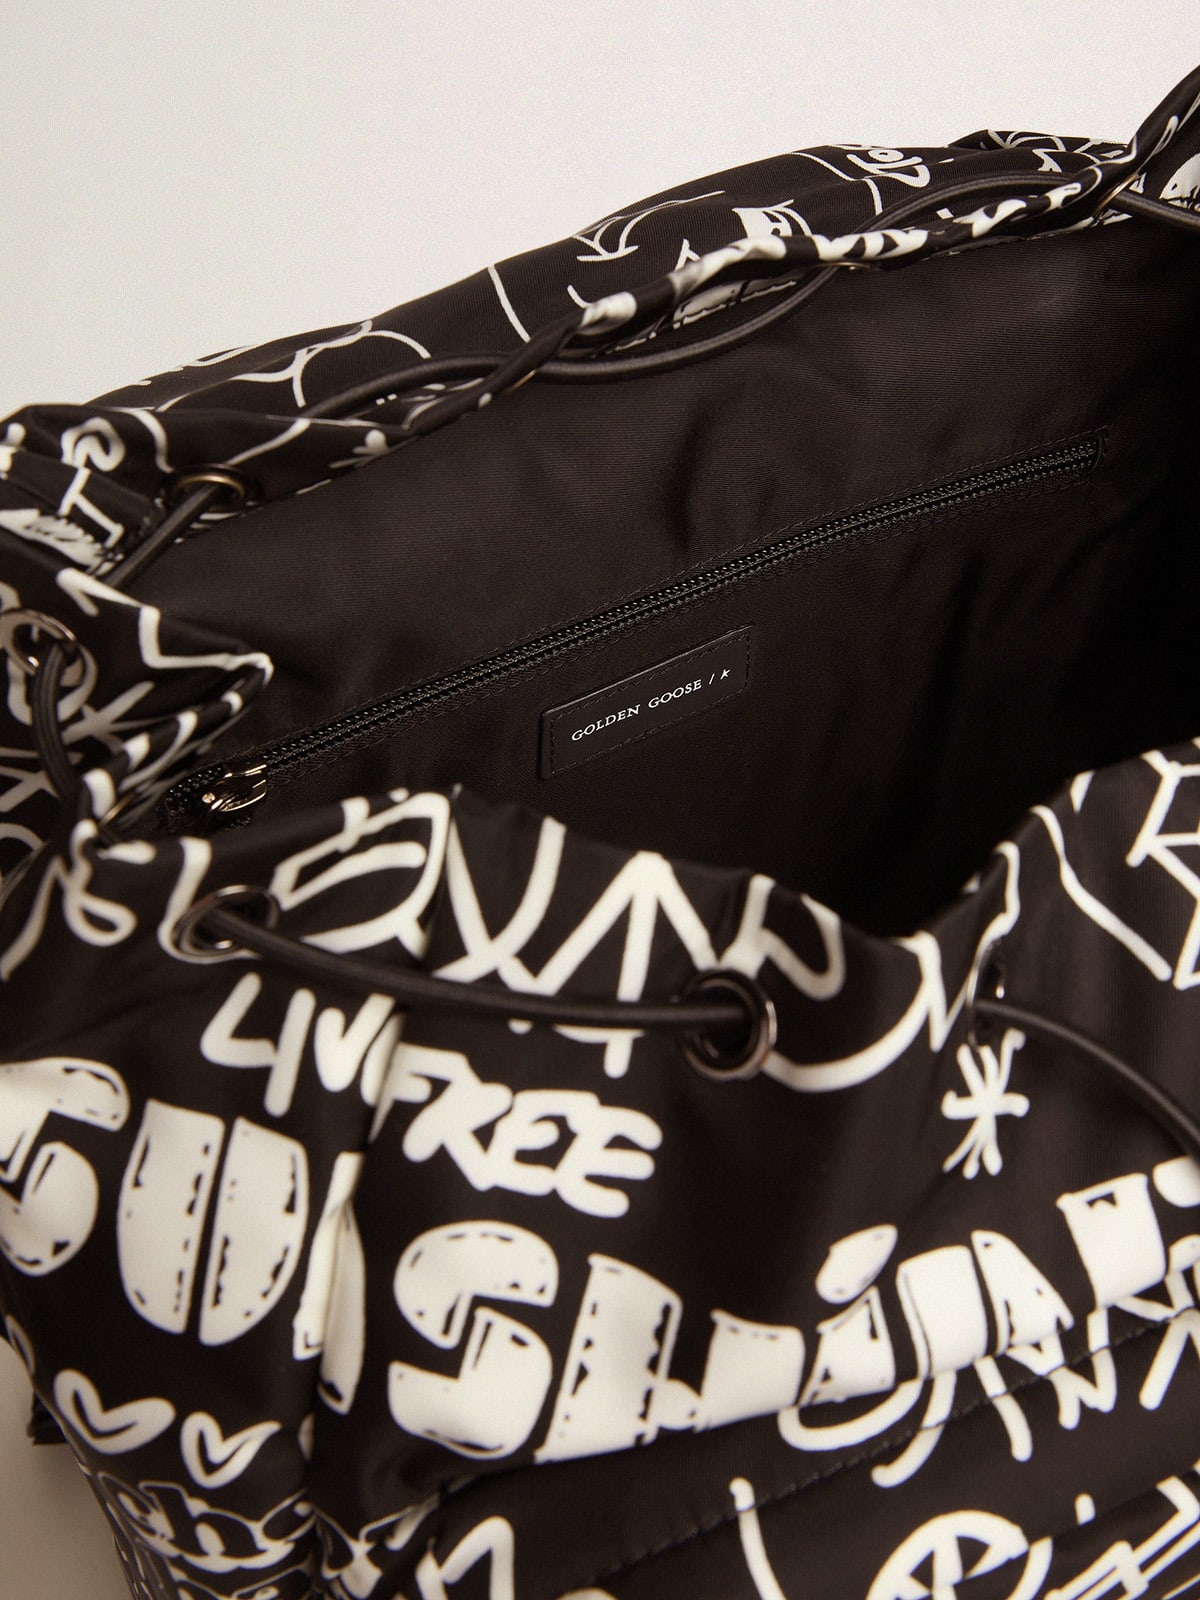 Golden Goose - Journey backpack in black nylon with contrasting white decorations in 